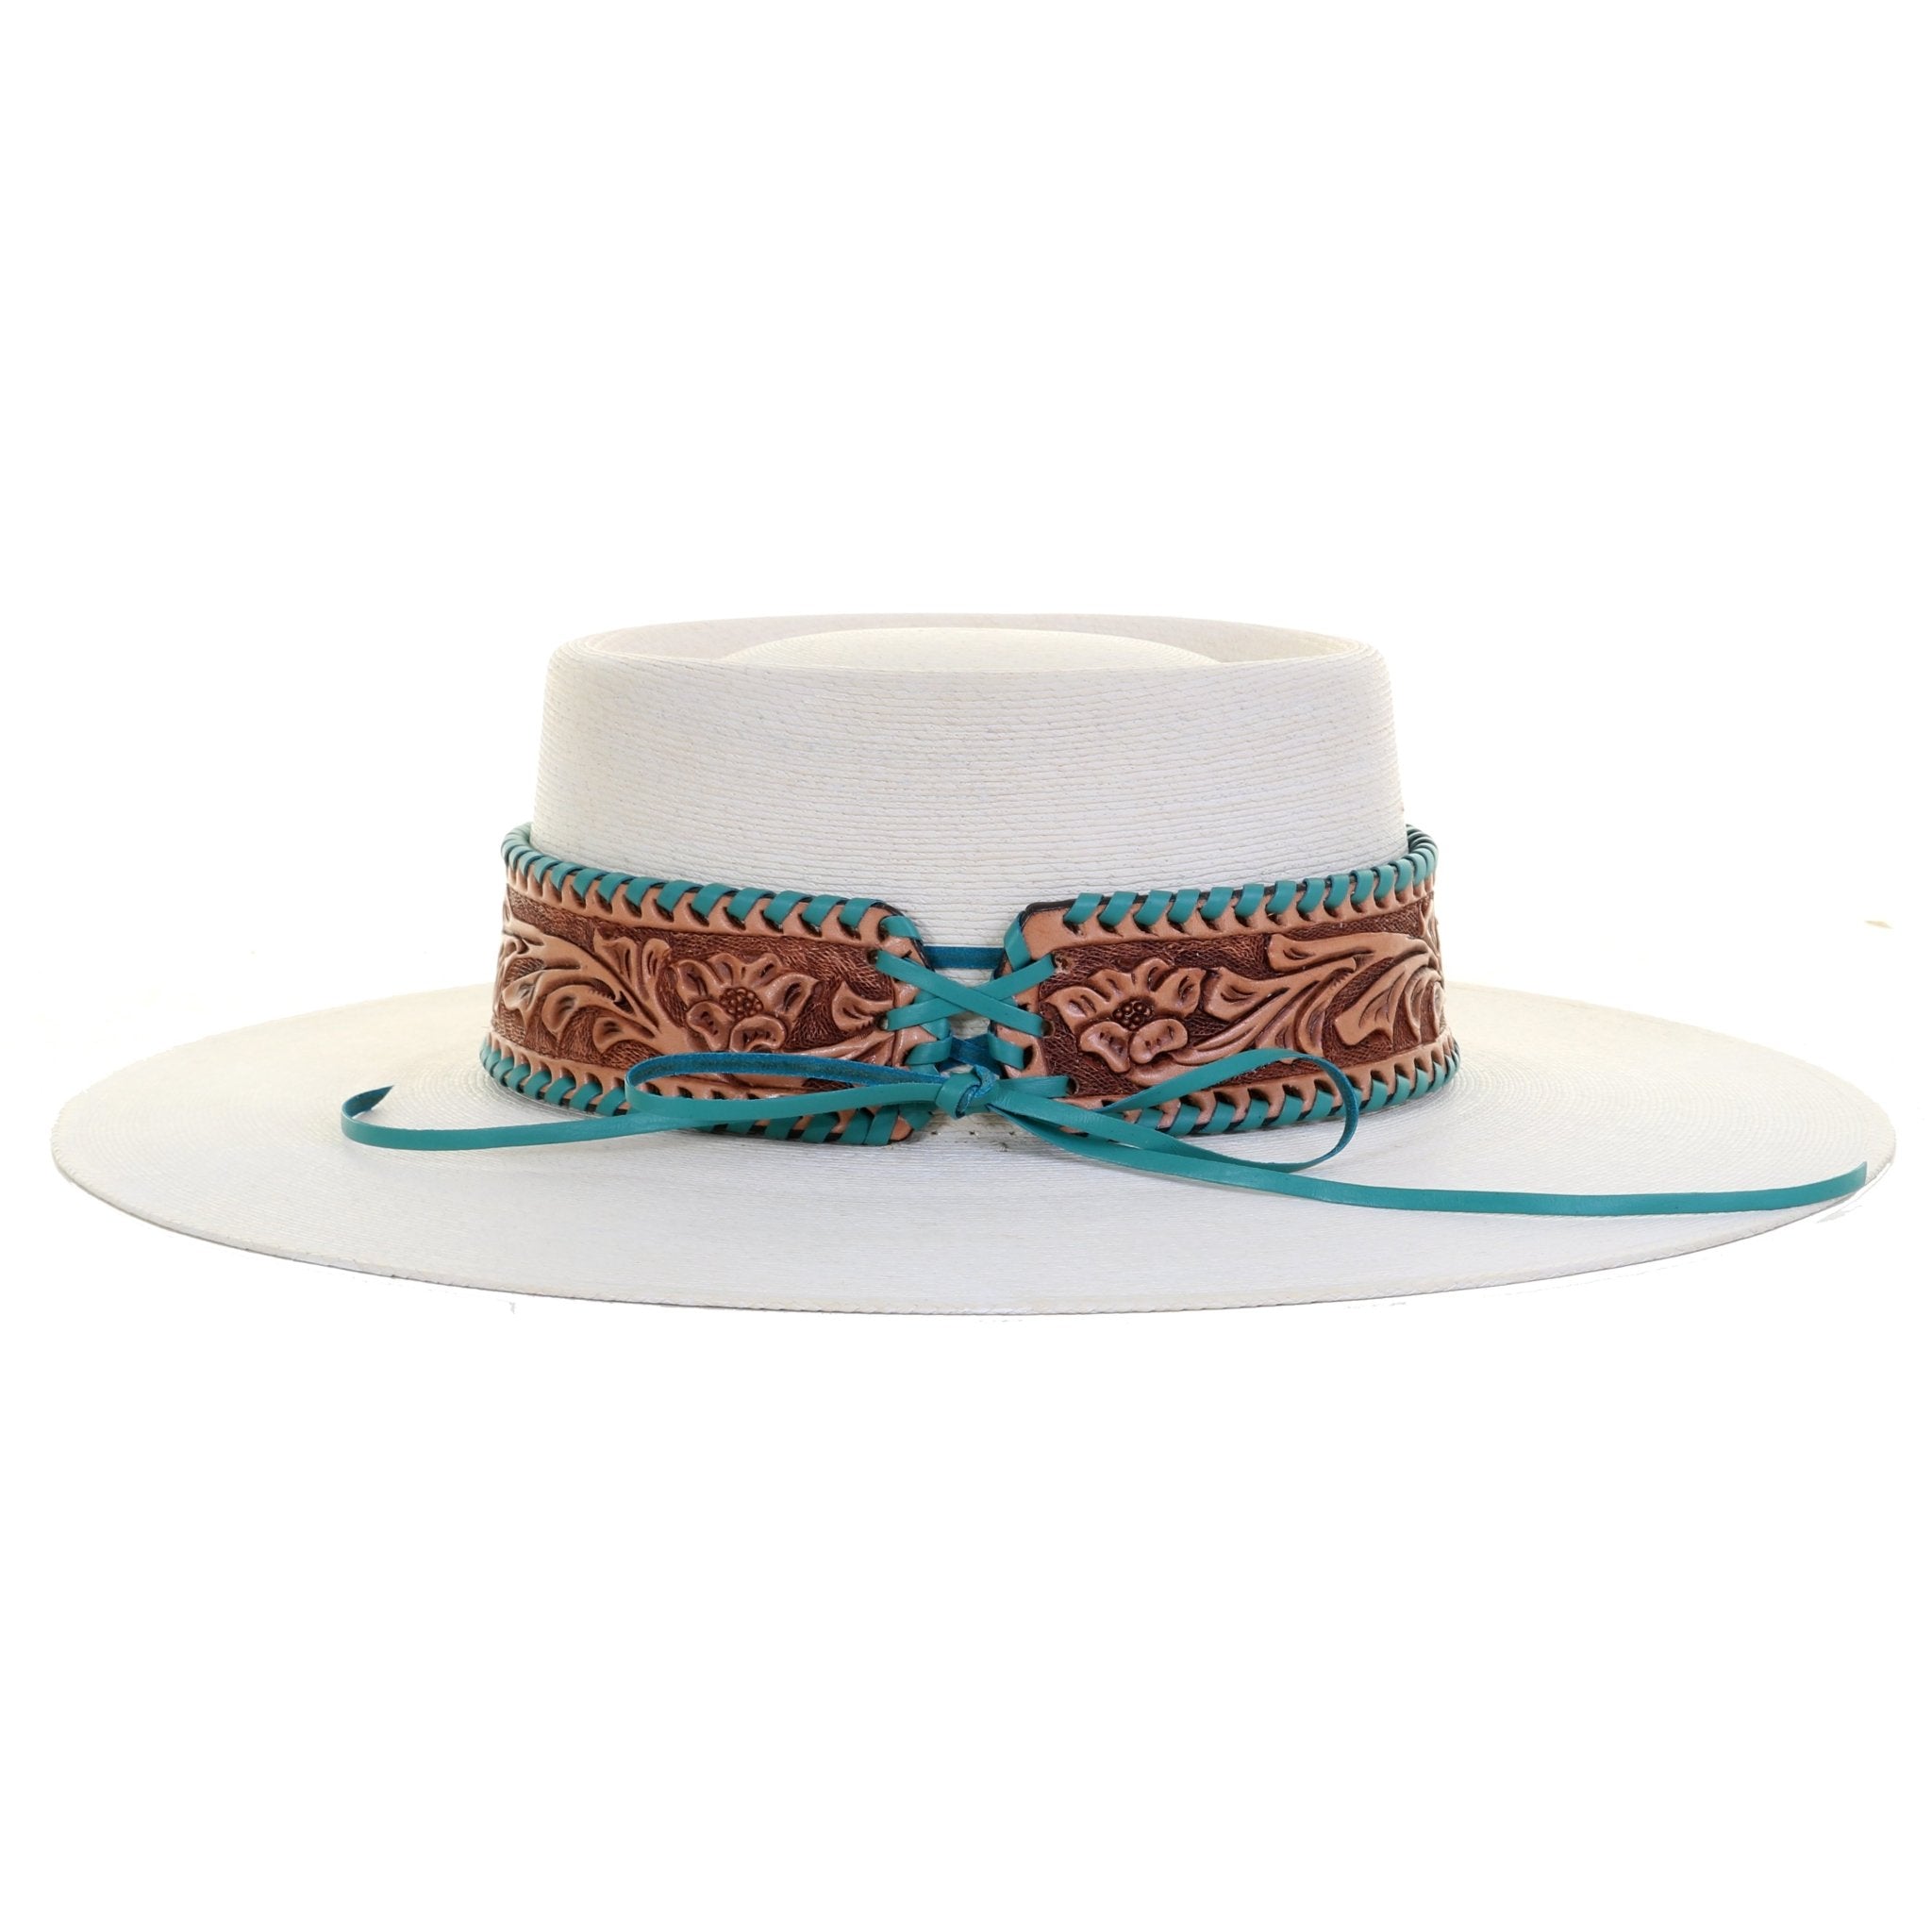 Leather Hat Bands, Dakota / Leather Cord Band / Small